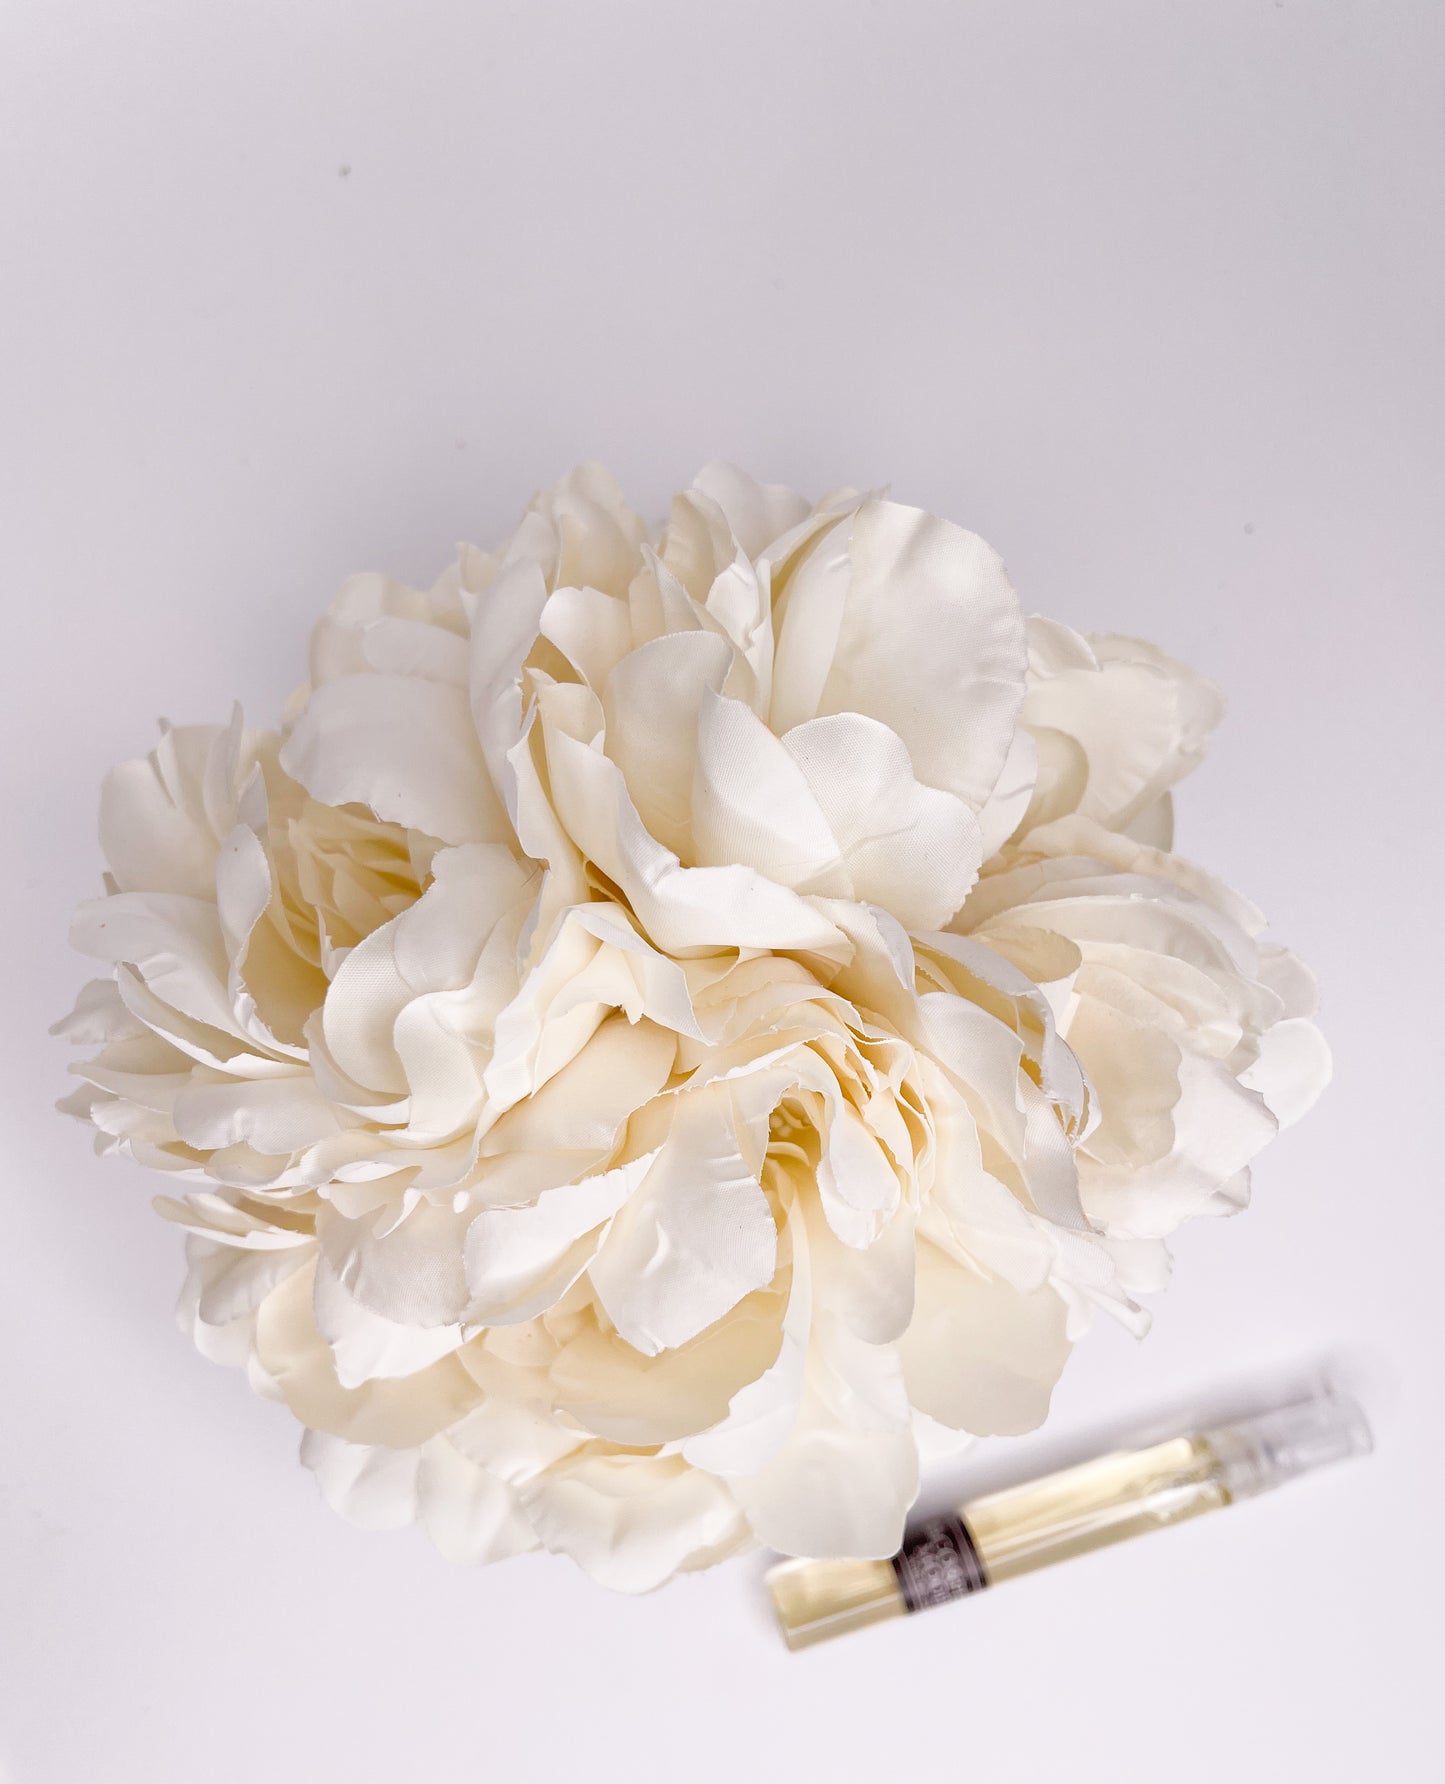 Home fragrance "White peonies"